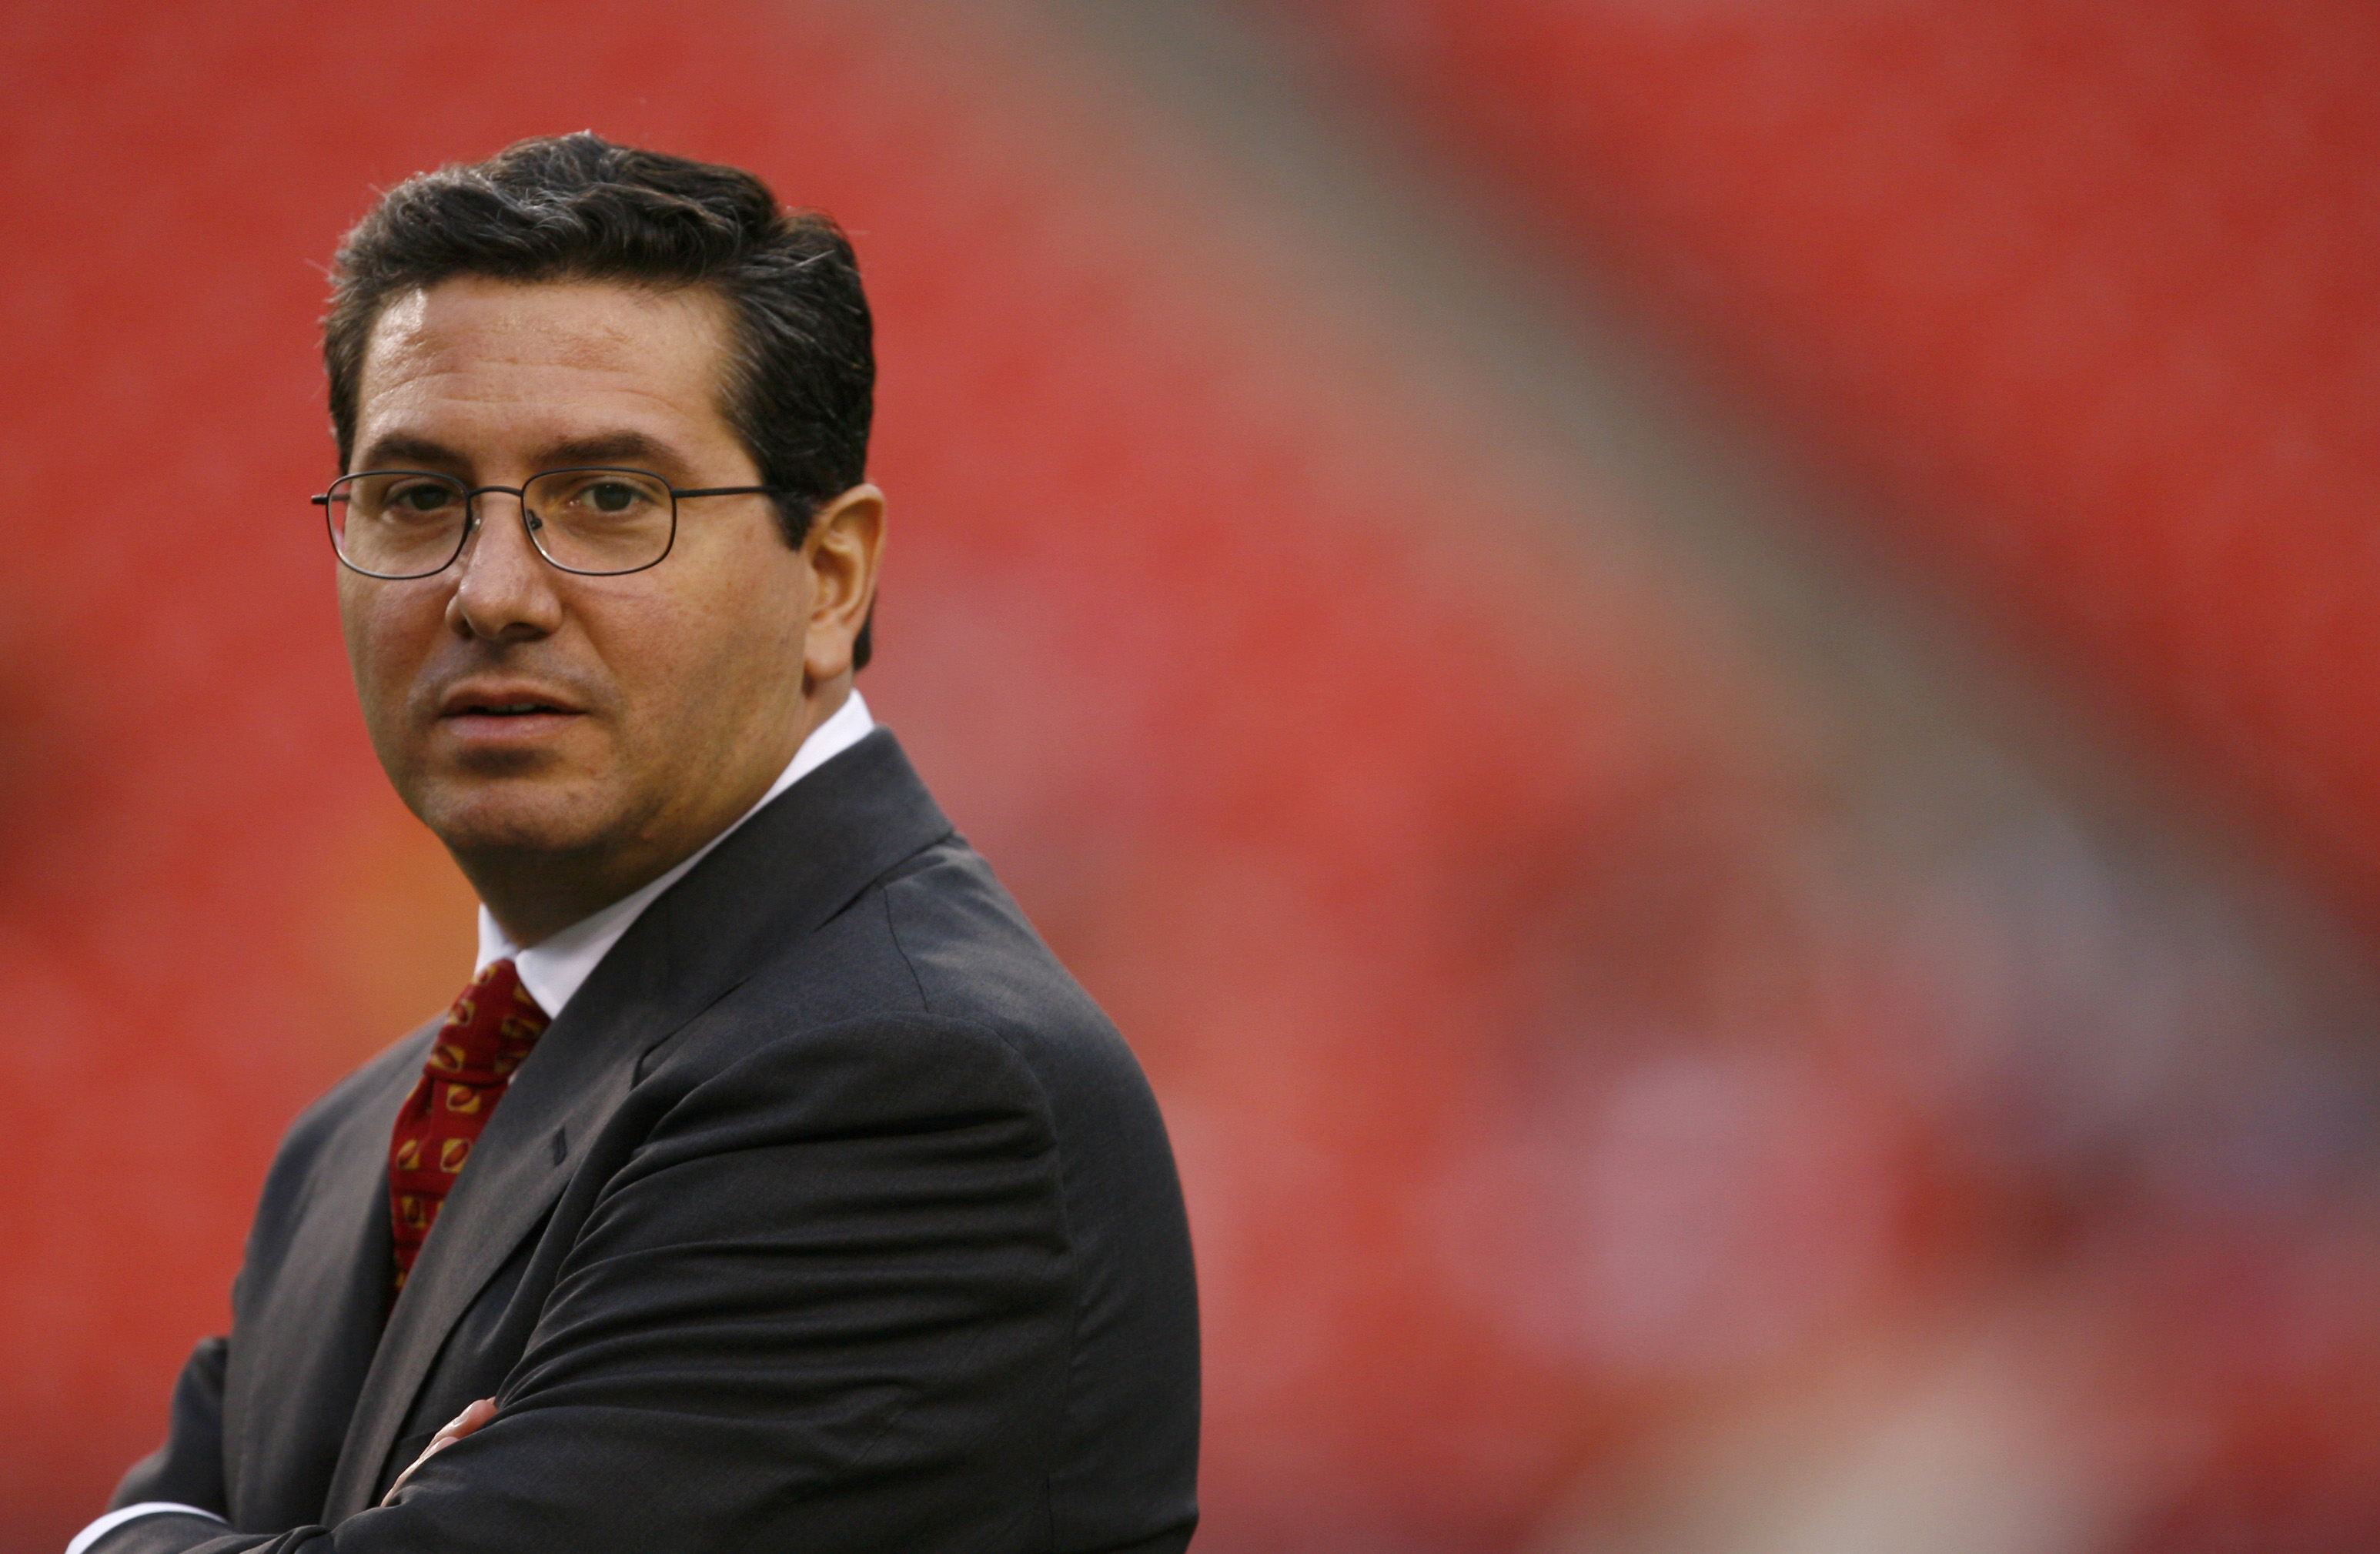 Owner Daniel Snyder of the Washington Redskins looks on before the game against the Minnesota Vikings on September 11, 2006 at FedExField in Landover, Maryland. The Vikings won 19-16.